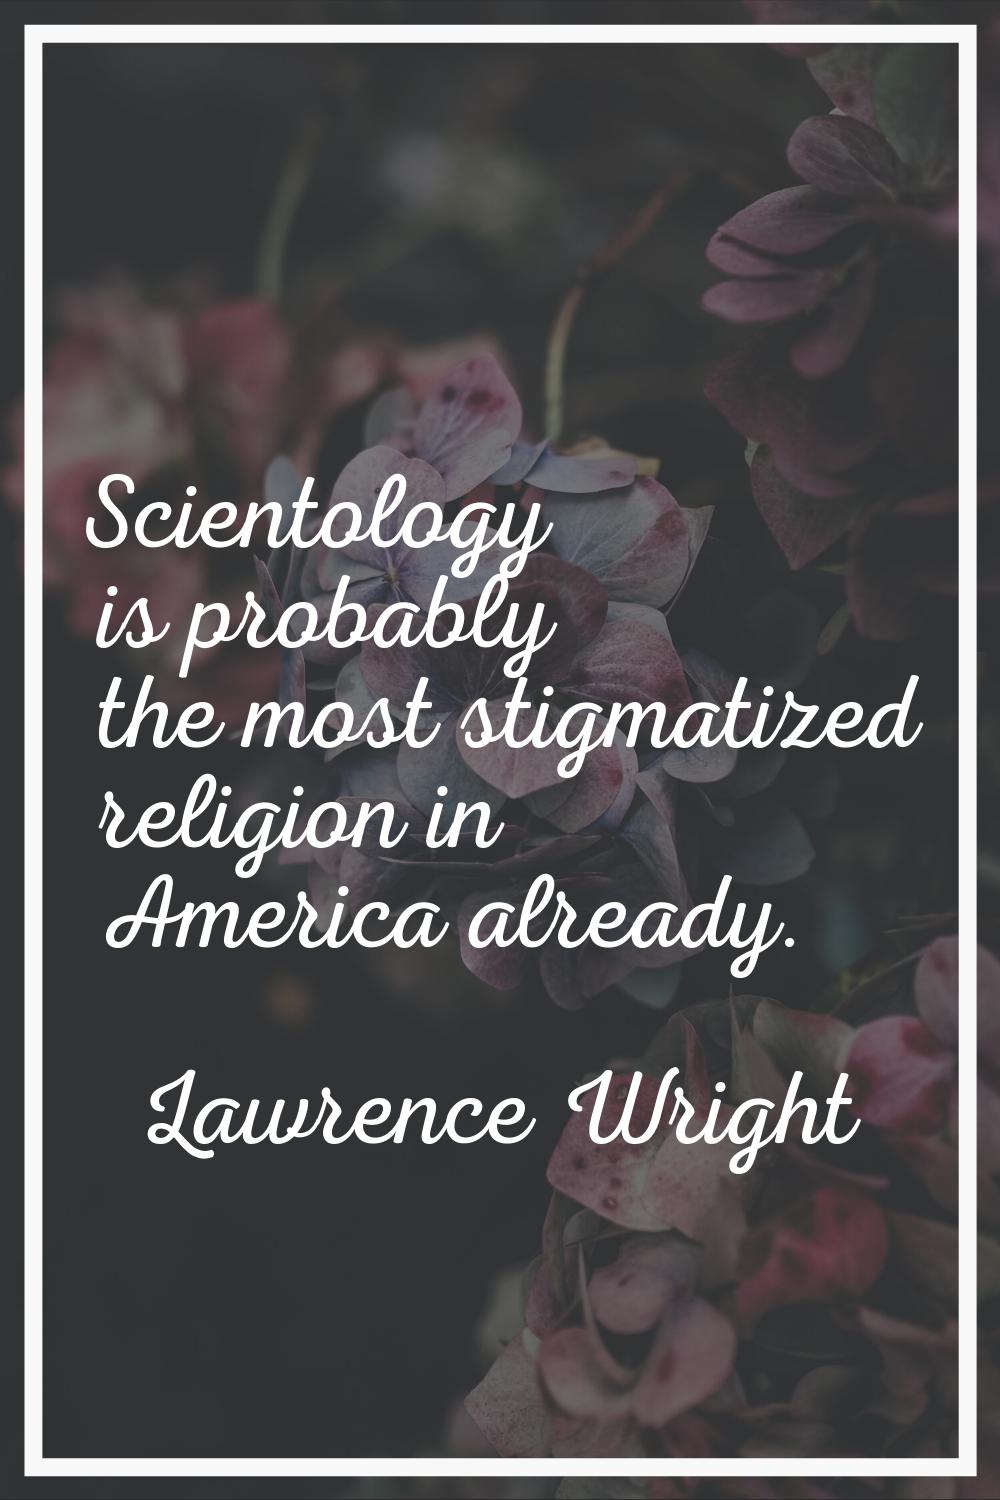 Scientology is probably the most stigmatized religion in America already.